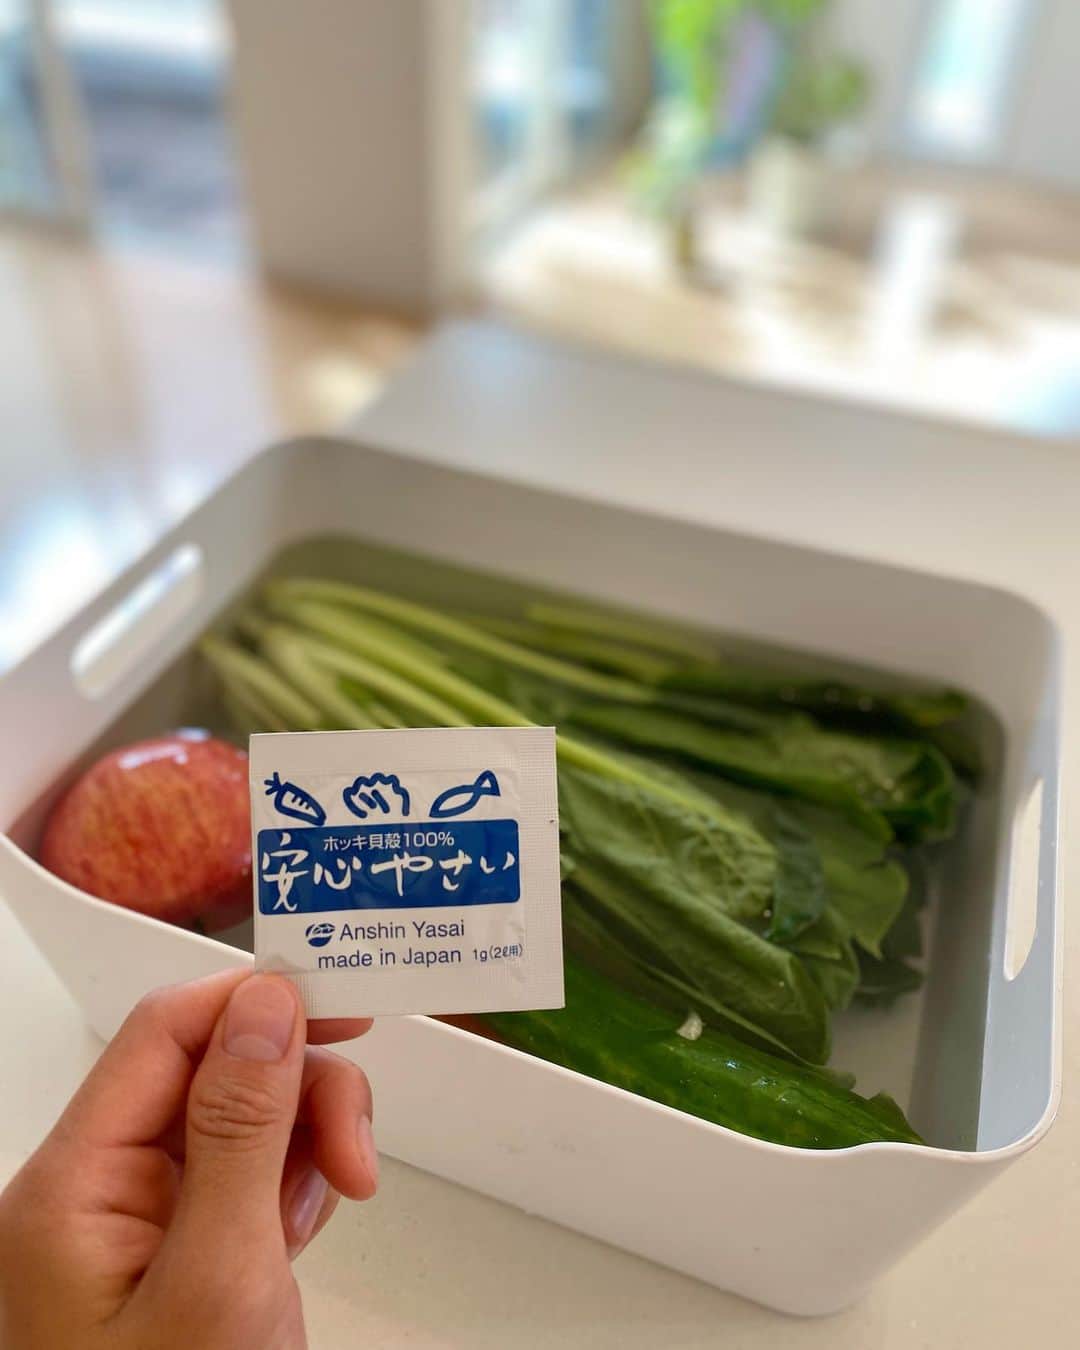 青山美郷さんのインスタグラム写真 - (青山美郷Instagram)「・ I started slow juice. I’ve been using this juicer from @huromjapan hurom200.  It’s really good quality.  When I start my morning off with this fresh juice, I feel the energy as it flows through my body.  I try to make juice with different vegetables and fruits everyday.  And I would recommend you to add lemon juice and an ice together!   And also I started to use this product called “安心やさい“ which is a powder of surf calm, I cleanse ingredients with this when I make my juice. It cleans up pesticides and pollution, it makes them much better quality.  I don’t feel good to have a chemical substance and gmo things but it is hard to arrange non-chemical with everything.  So this powder is now my essential item for aiming my better life. ・ スロージュース始めました🌿 @huromjapan さんのhurom200を購入。 とっても使いやすくて、味や口当たりも良くてこれにして本当よかった。  毎朝色々な食材で試しているんですが、一日の始まりにスロージュースを飲むと、身体の巡りが良くなる感覚があります。 絞ったレモンと氷を一つ入れると飲みやすくておすすめ。  そして、ジュースの主役であるお野菜と果物たちですが... 実は素敵なご縁があり、ホッキ貝の貝殻で作られたパウダー「安心やさい」を使用し始めました。 写真にあるように、水に野菜や果物と一緒に入れます。 汚染物質や農薬などを取ってくれたりその他にも様々な使い方があるんですが、これをするとしないとでは食材のクオリティが全く違うんです。  化学物質や遺伝子組み換えされたものを身体に入れるのは違和感がある。 だけど食材全てを無農薬で揃えるのもなかなか大変。  そんな中でも、"より豊かな暮らし"を目指す私にとって必需品なんです♡  しかも、環境を汚染することなく、排水管や河川を綺麗にしながら自然に還り、最終的に原料の貝殻成分へ戻るんだとか。  皆様も是非お試しくださいね。  #slowjuice#slowjuicer#スロージュース#スロージューサー#huromjuicer#hurom200」8月8日 11時25分 - aoyama_misato